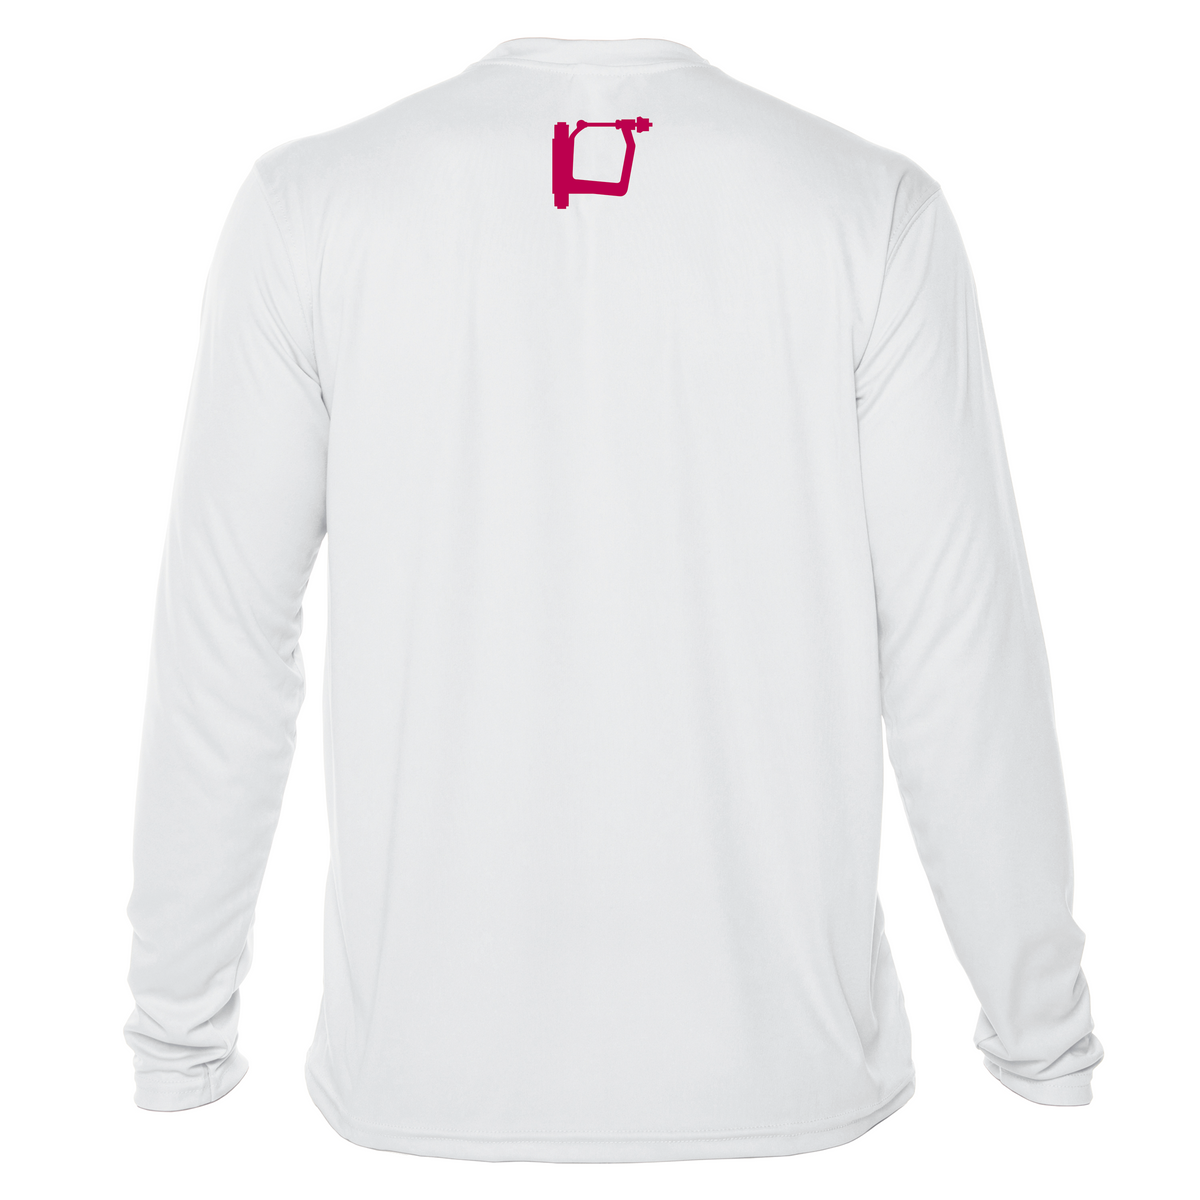 UV United States Rowing and Oarlock Graphics Long Sleeve - White